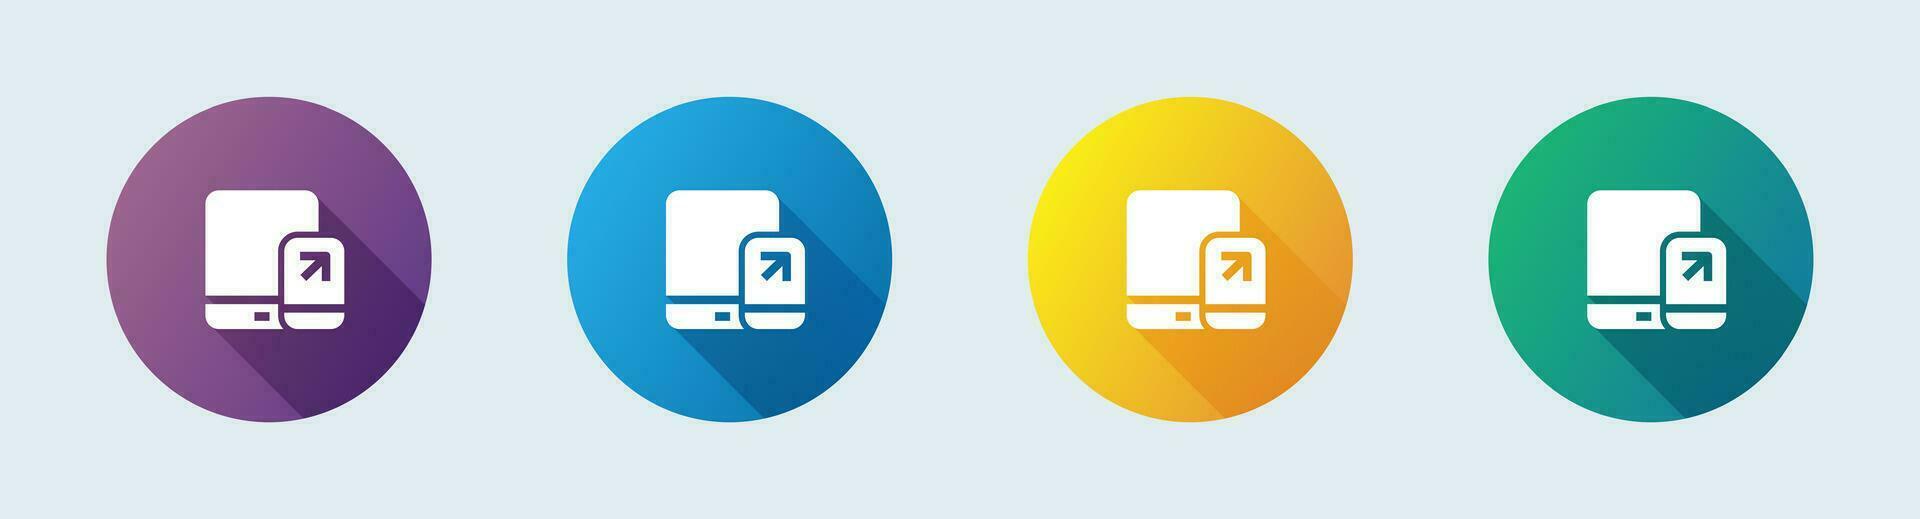 Tablet solid icon in flat design style. Device signs vector illustration.